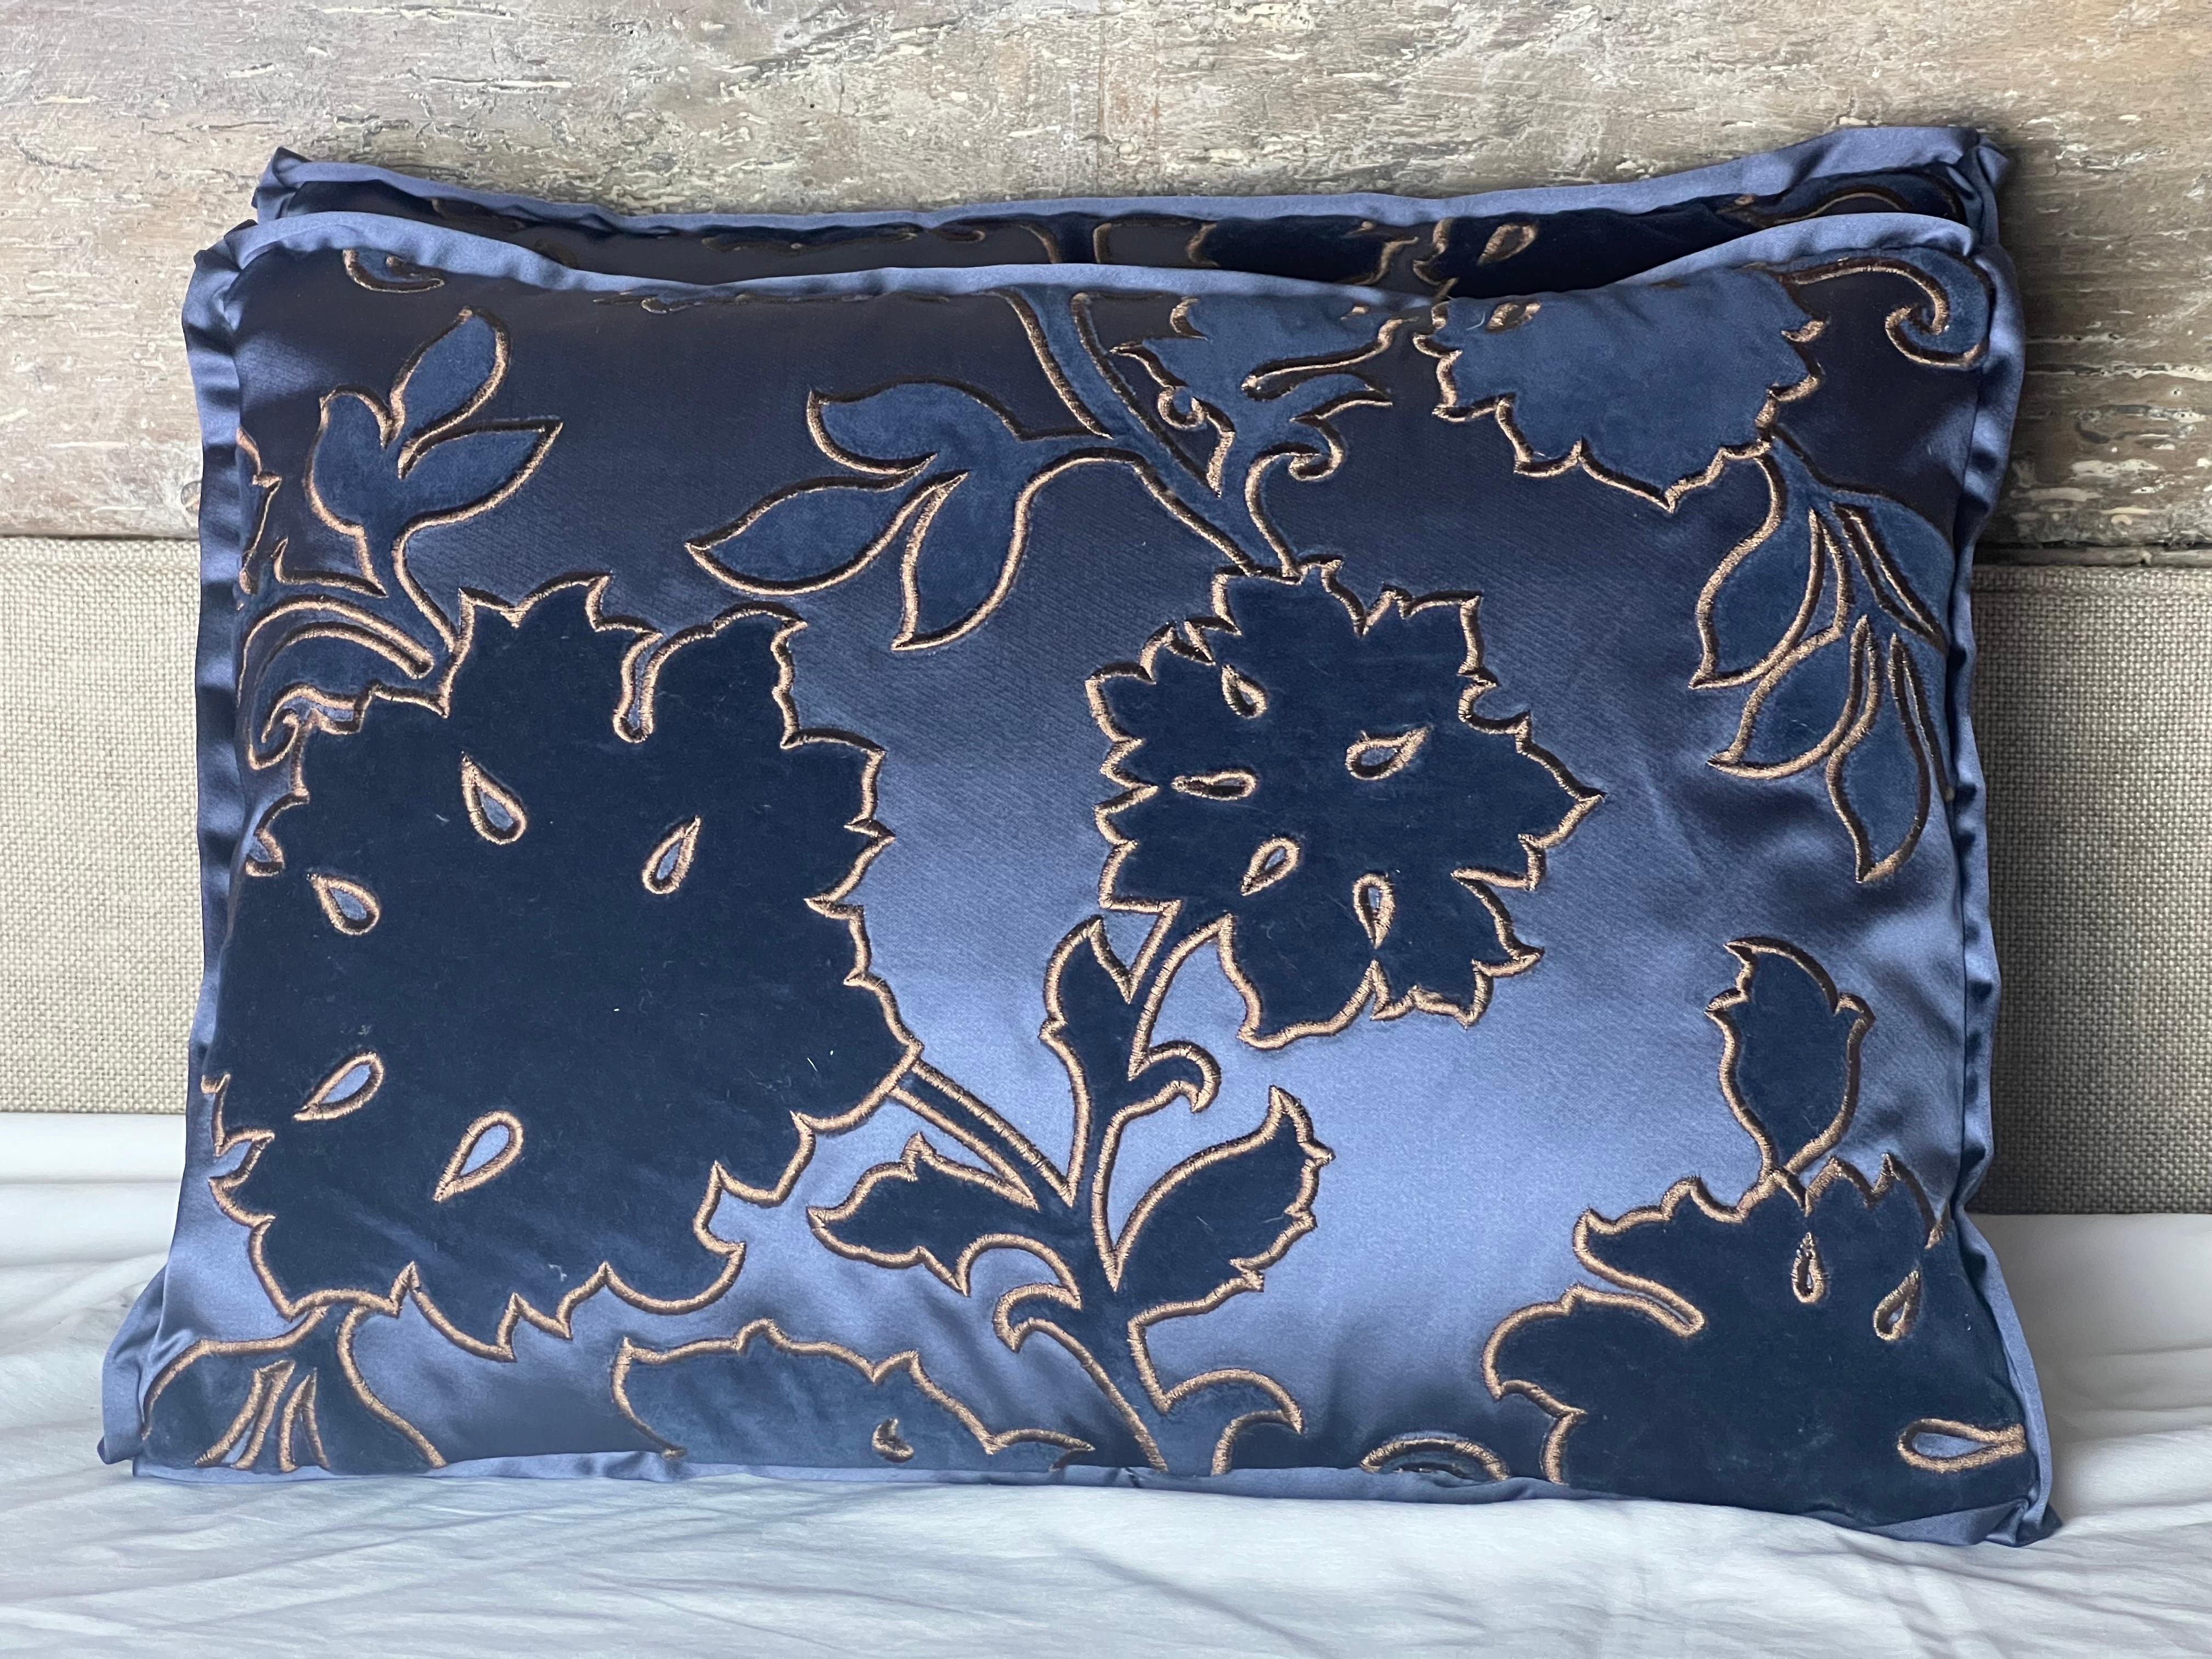 Custom pillows made with silk and velvet in beautiful shades of blues. Silk backs. Down inserts, zipper closures.